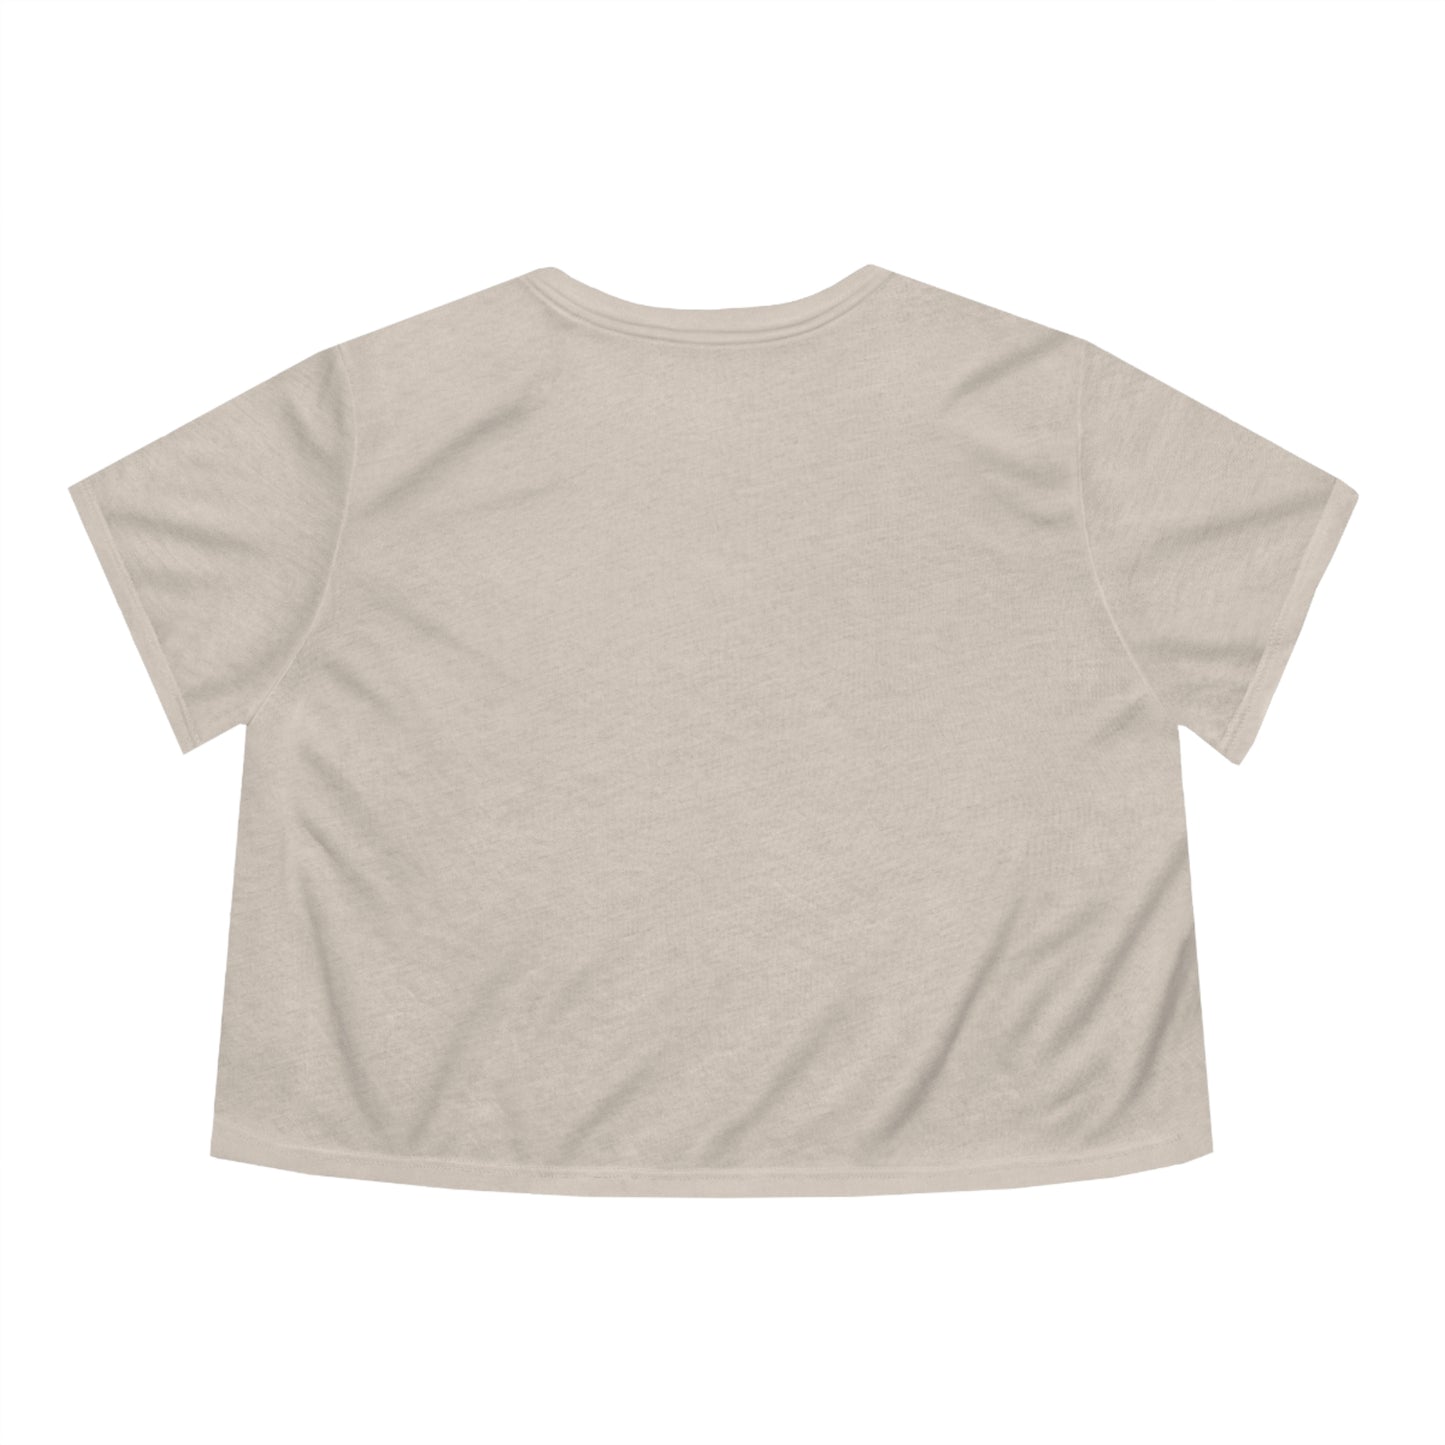 The 19th of June Women's Flowy Cropped Tee